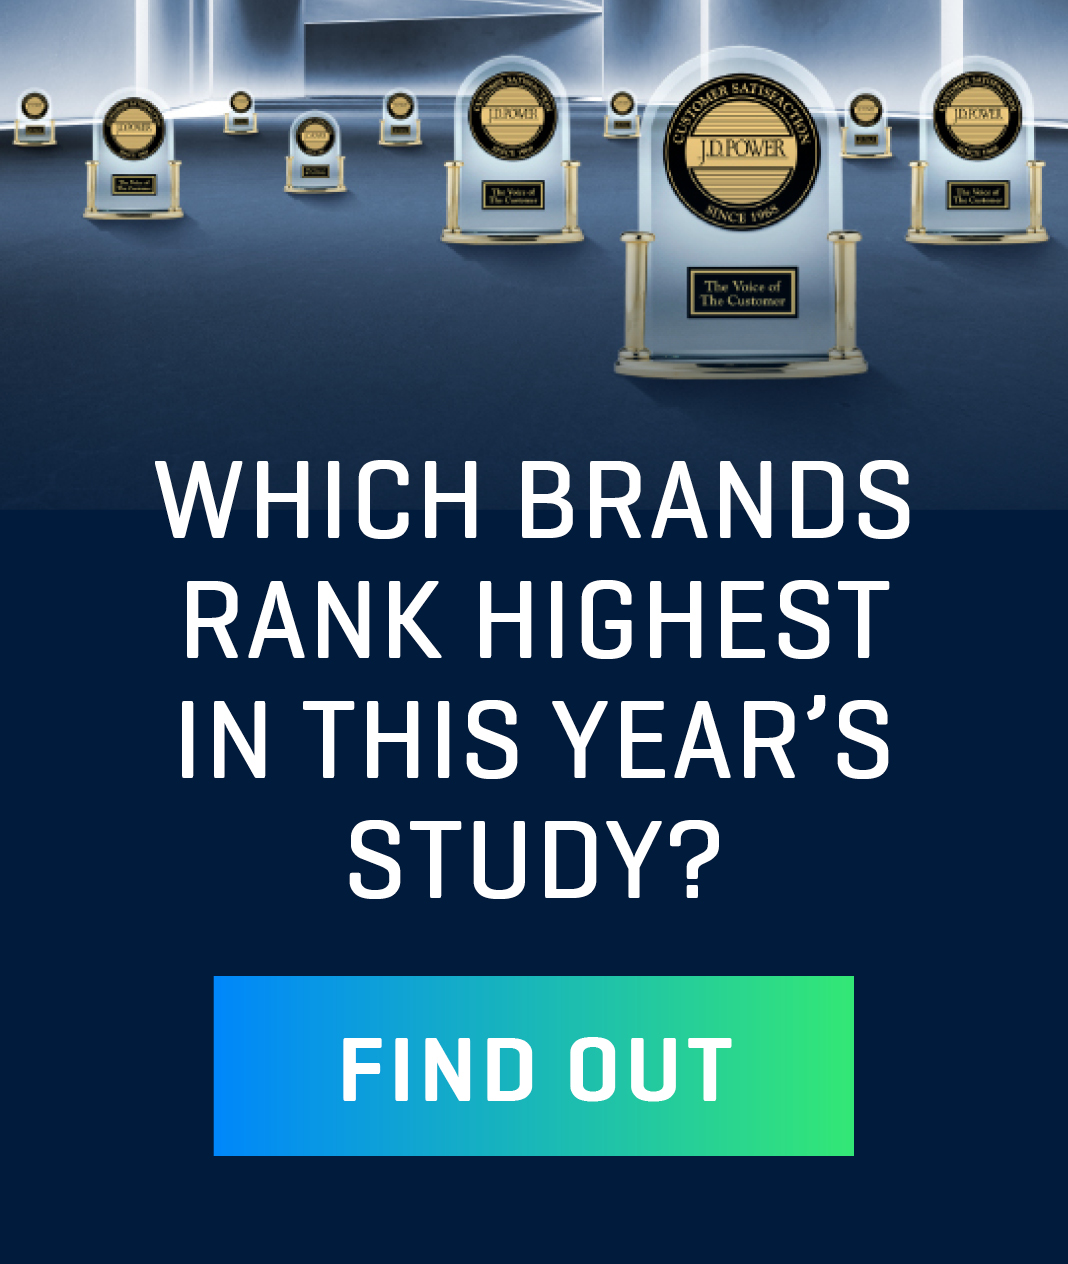 Which brands rank highest in this year's study?